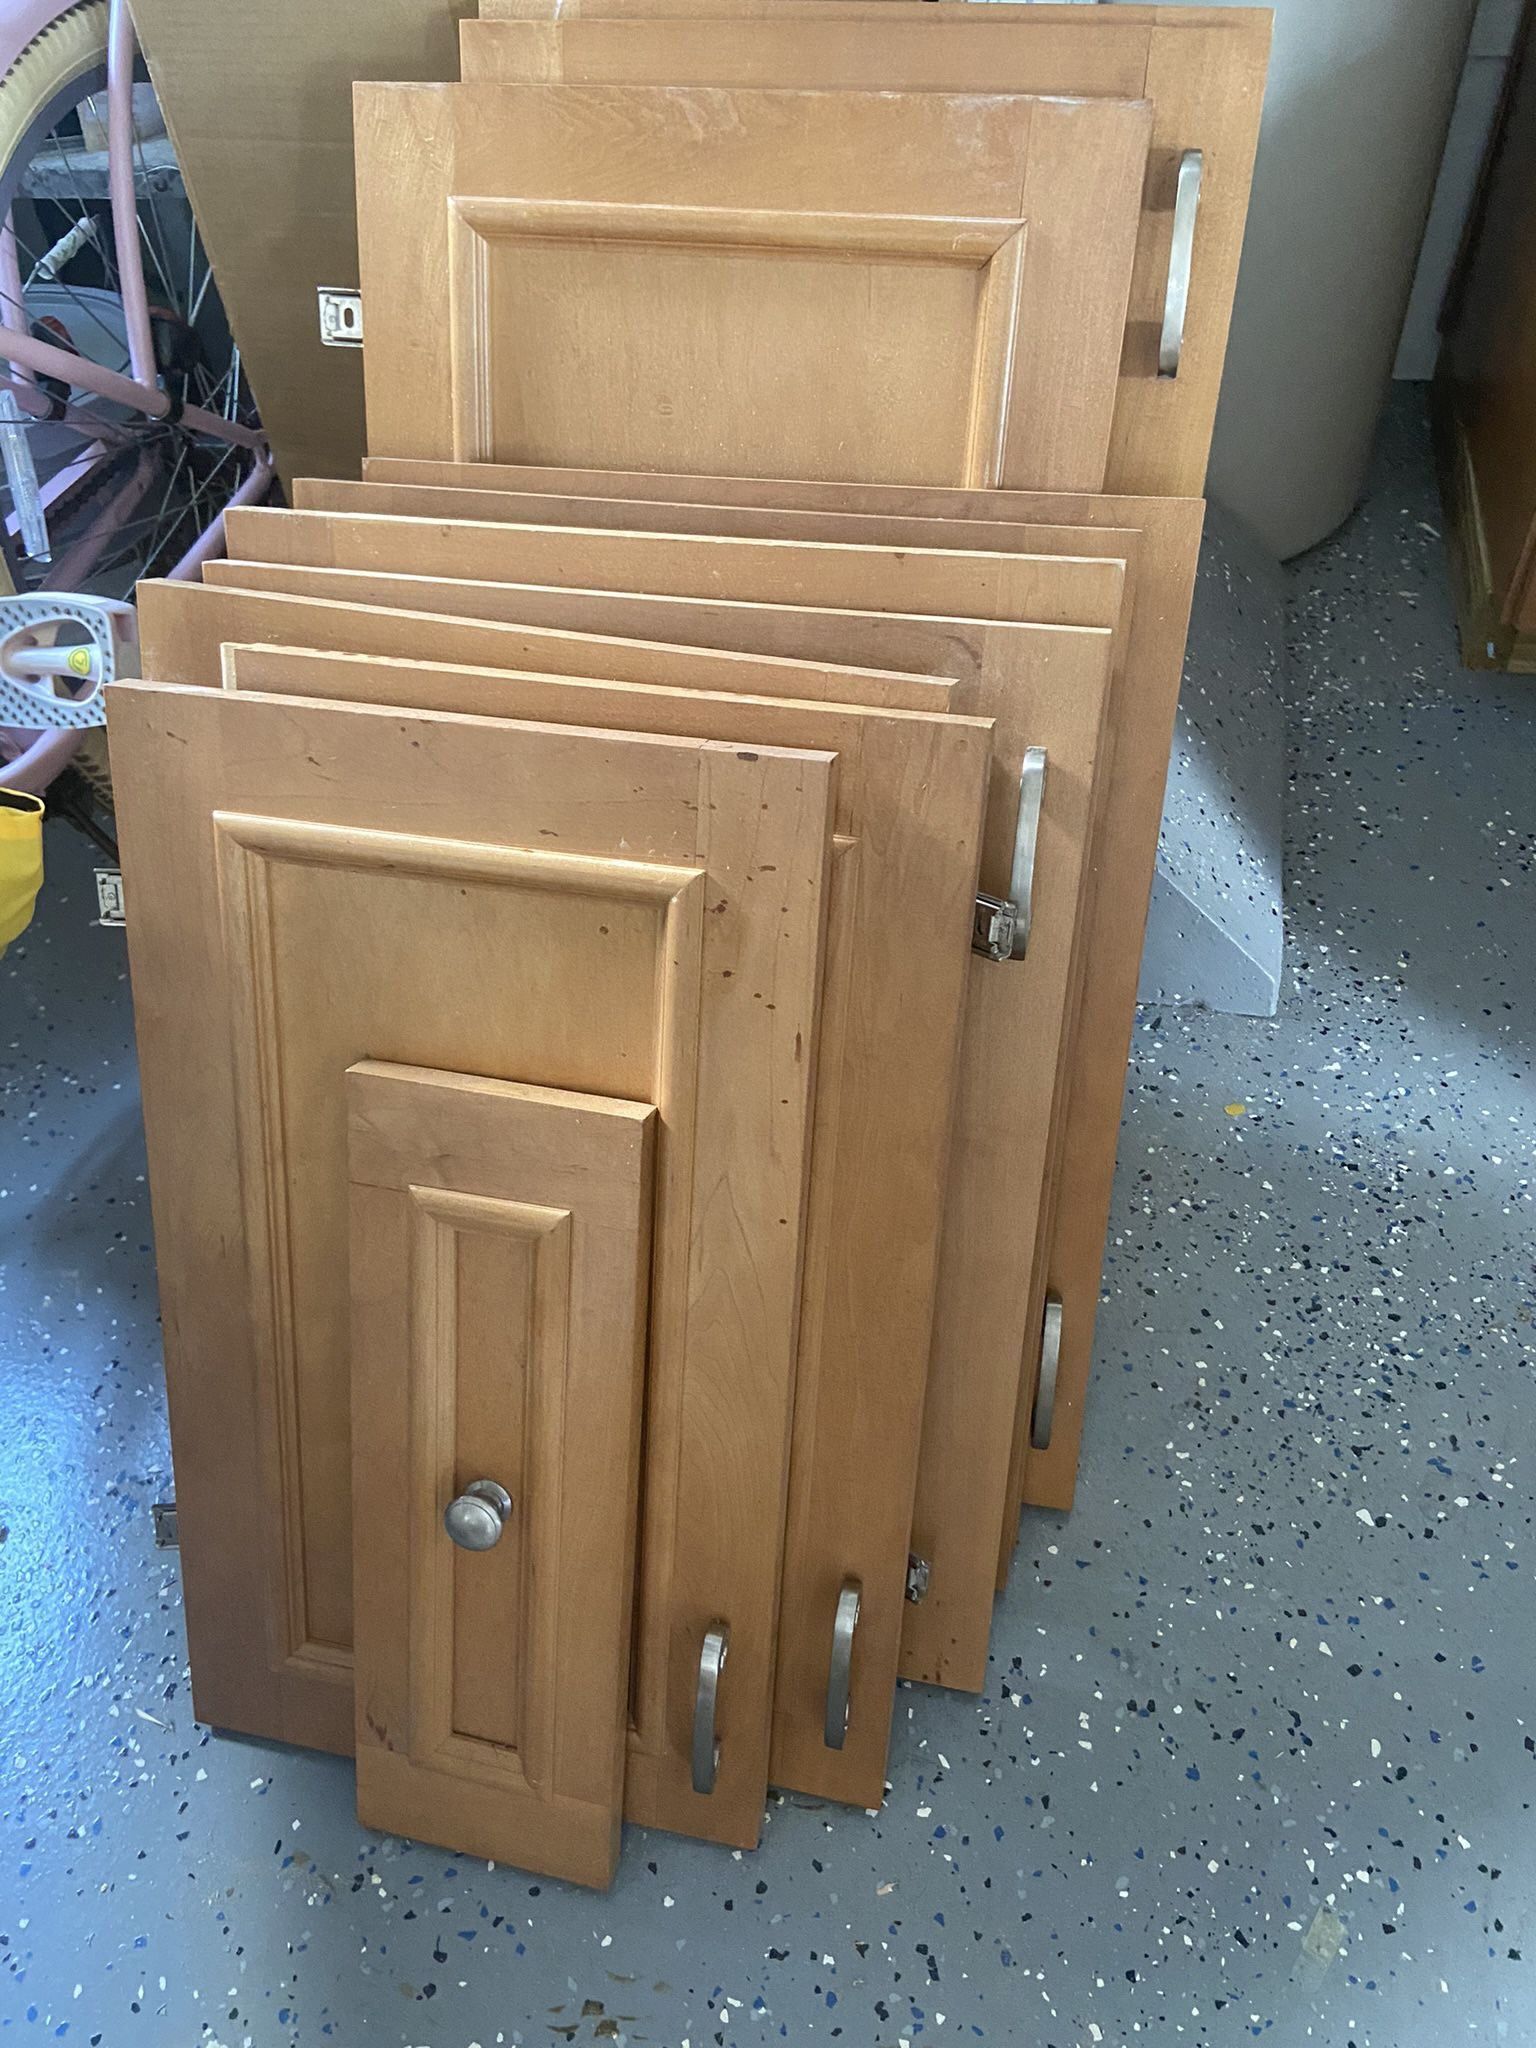 Cabinet Doors For Cheap 